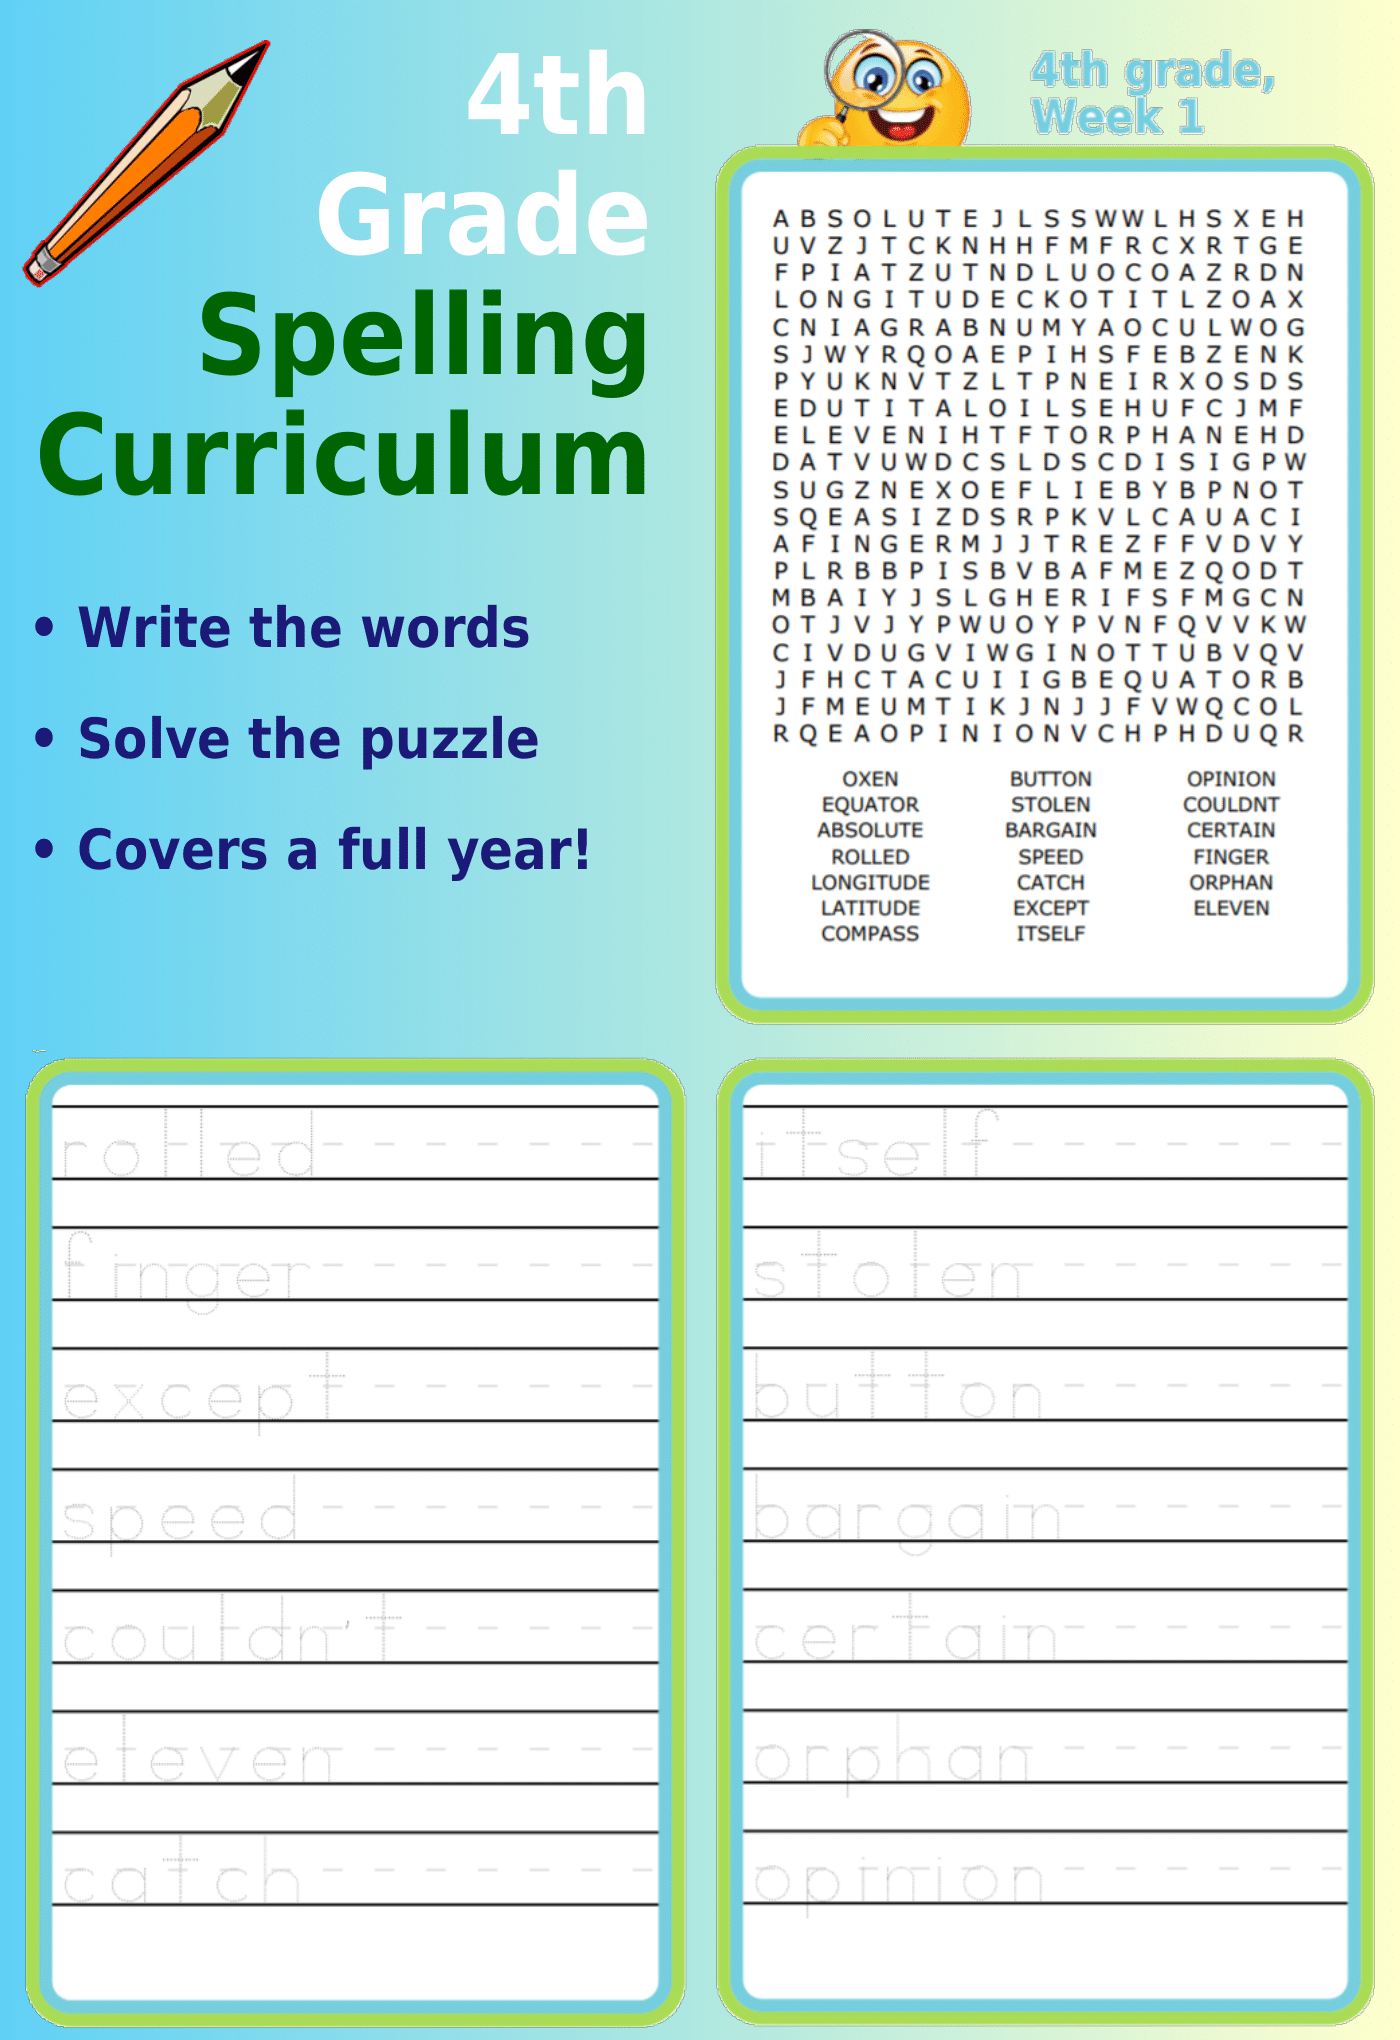 4th Grade Spelling Curriculum: Word search and letter tracing